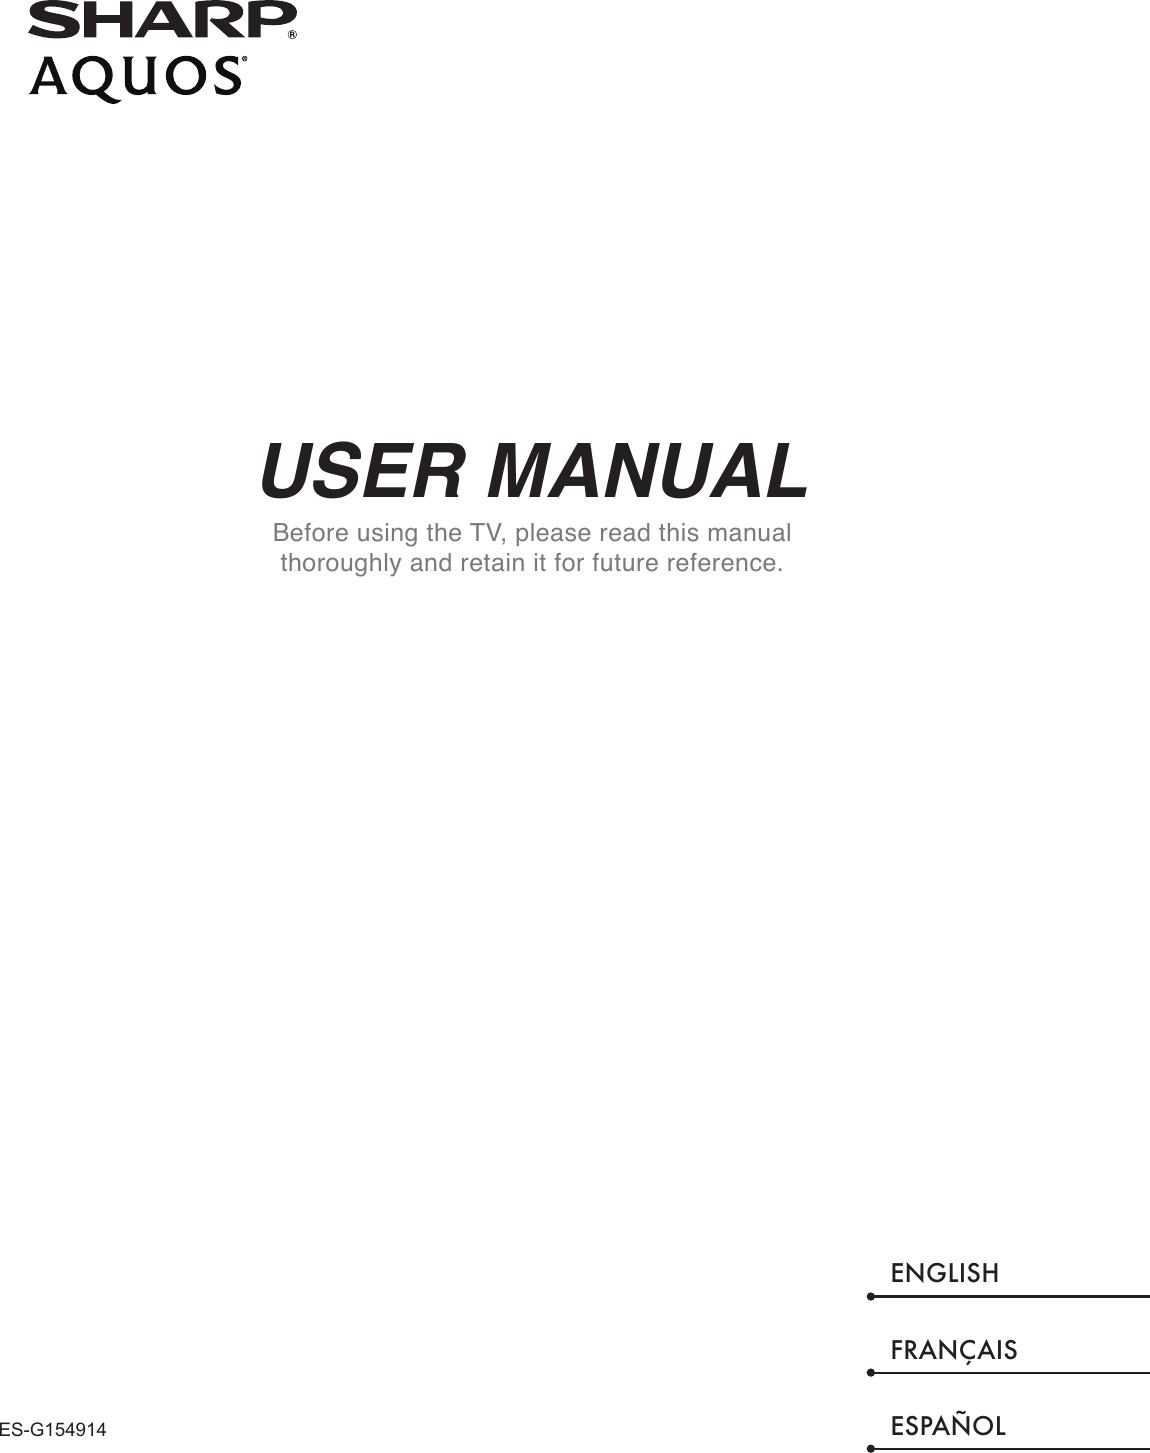 USER MANUALBefore using the TV, please read this manual thoroughly and retain it for future reference.ENGLISHFRANÇAISESPAÑOLES-G154914